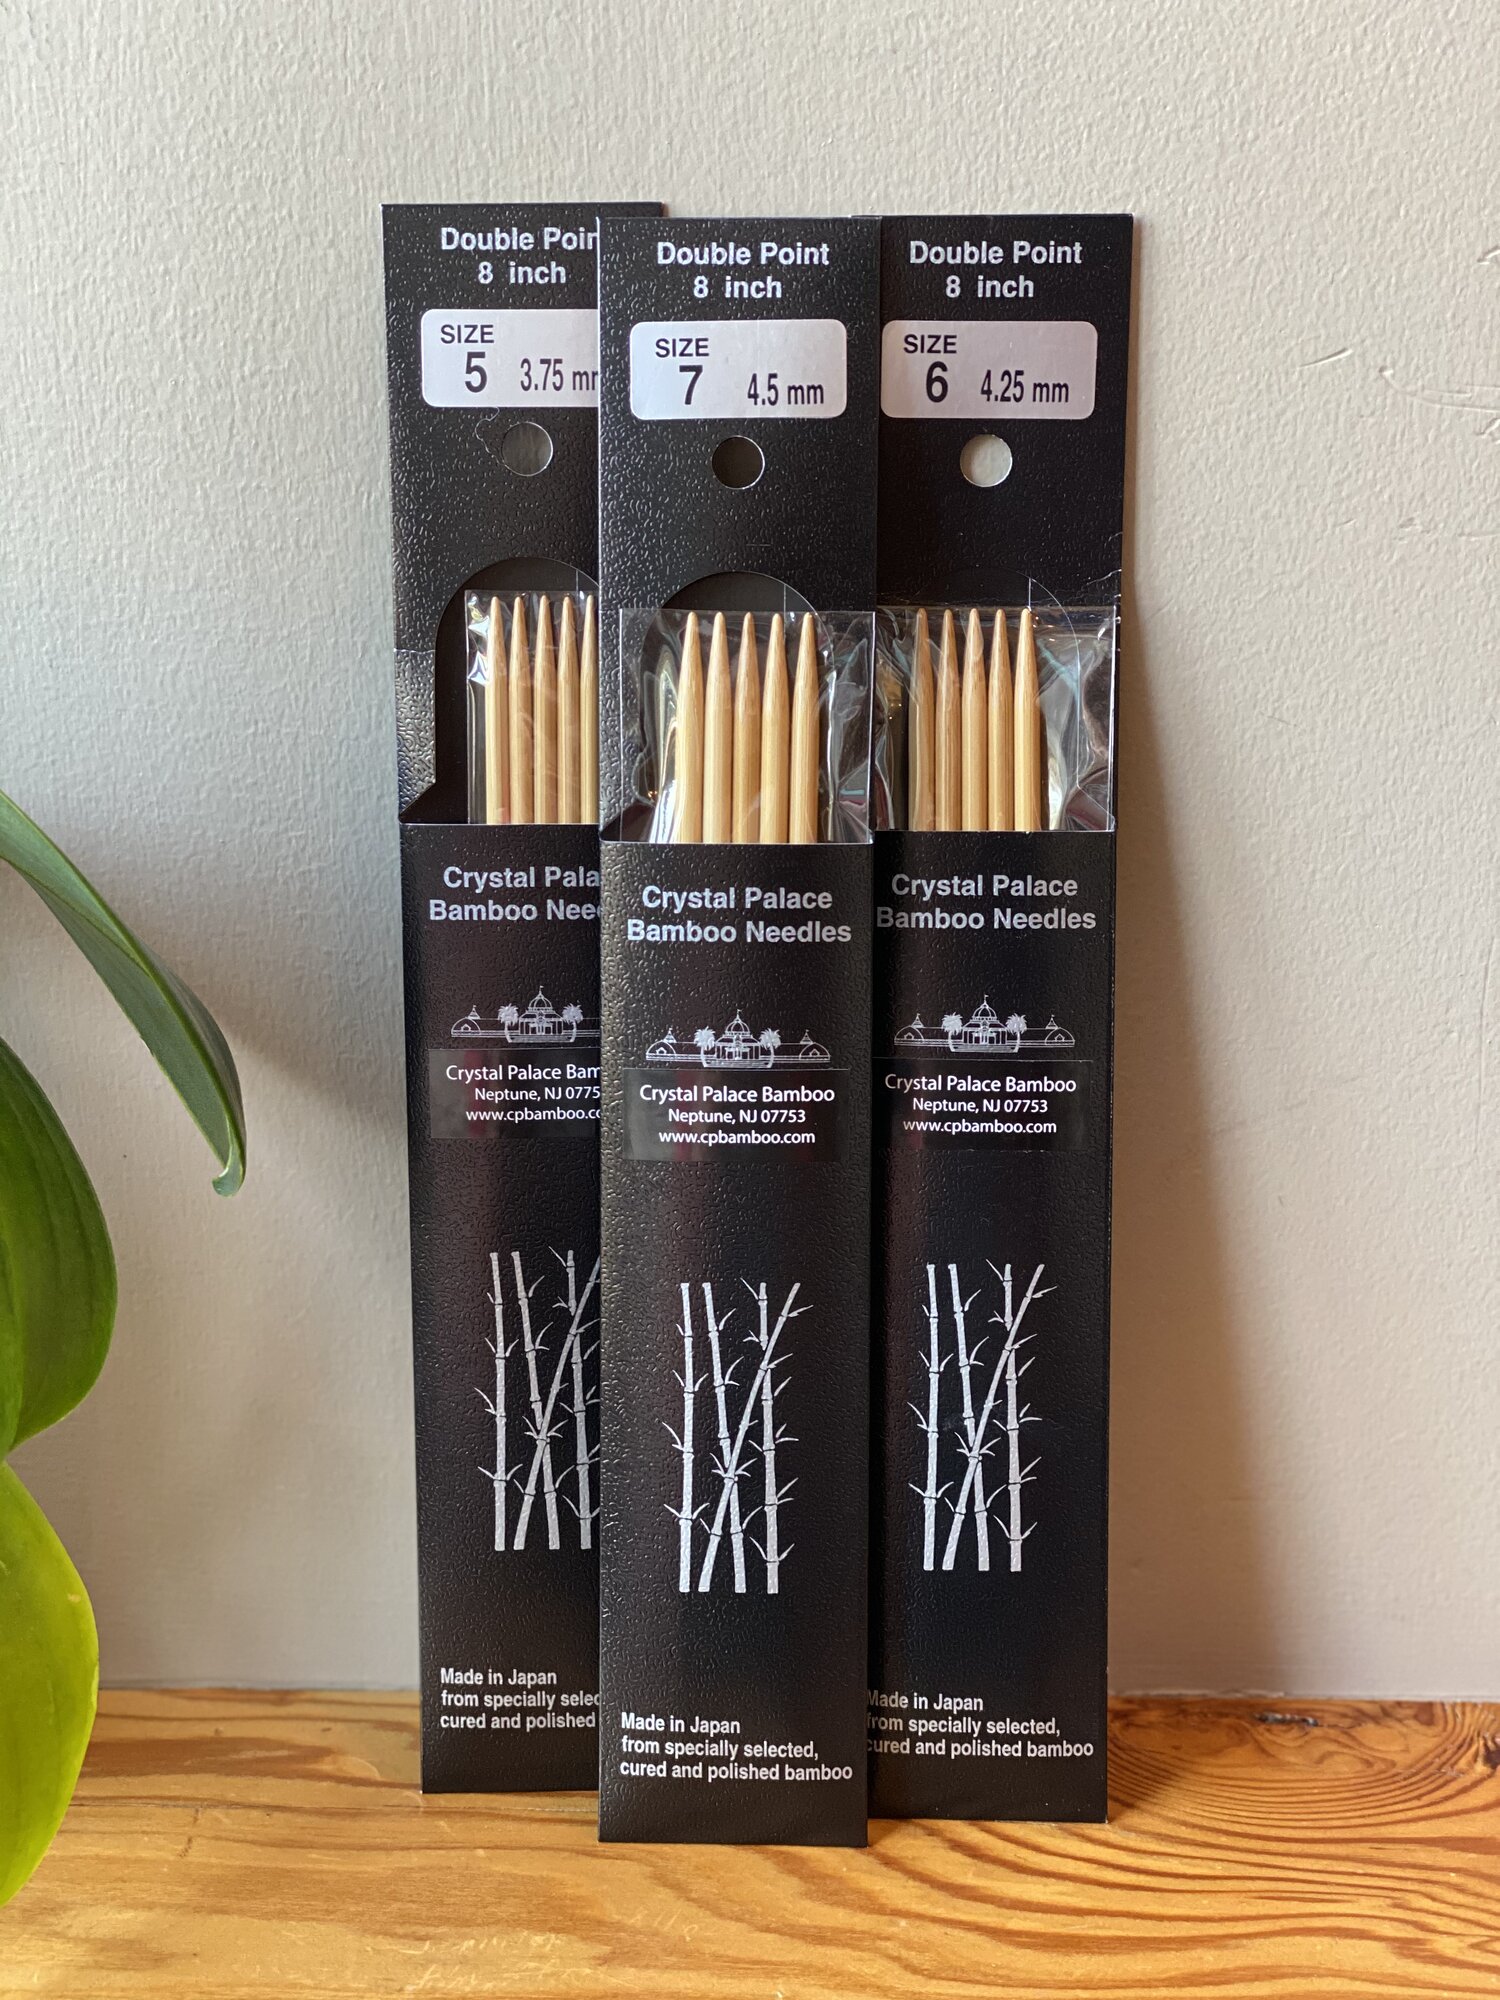 DOUBLE POINTED KNITTING NEEDLE SET – 7.9” LONG - BAMBOO - INCLUDES